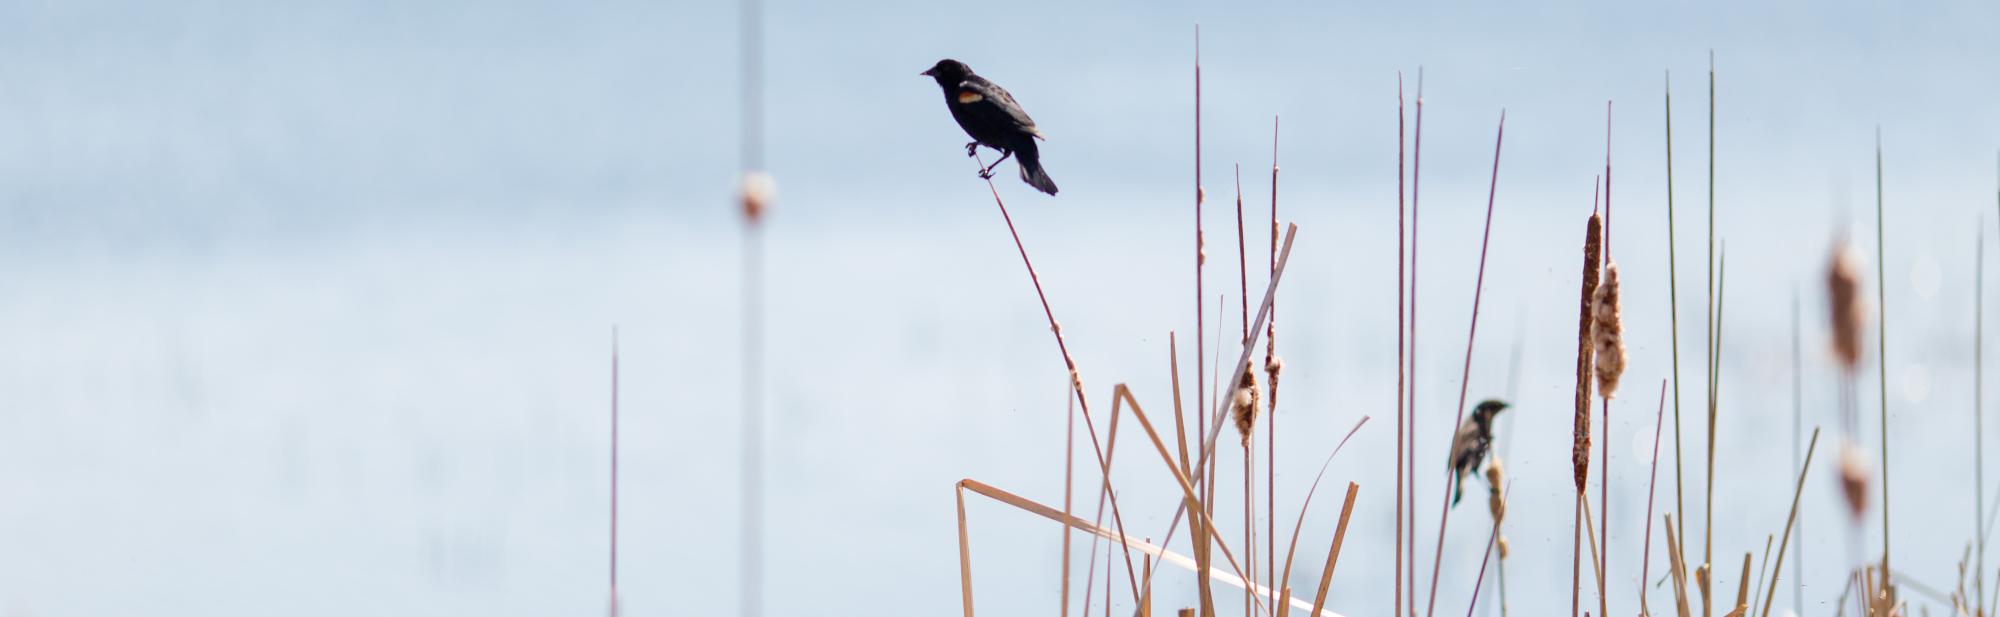 A red winged blackbird perched on tall grass